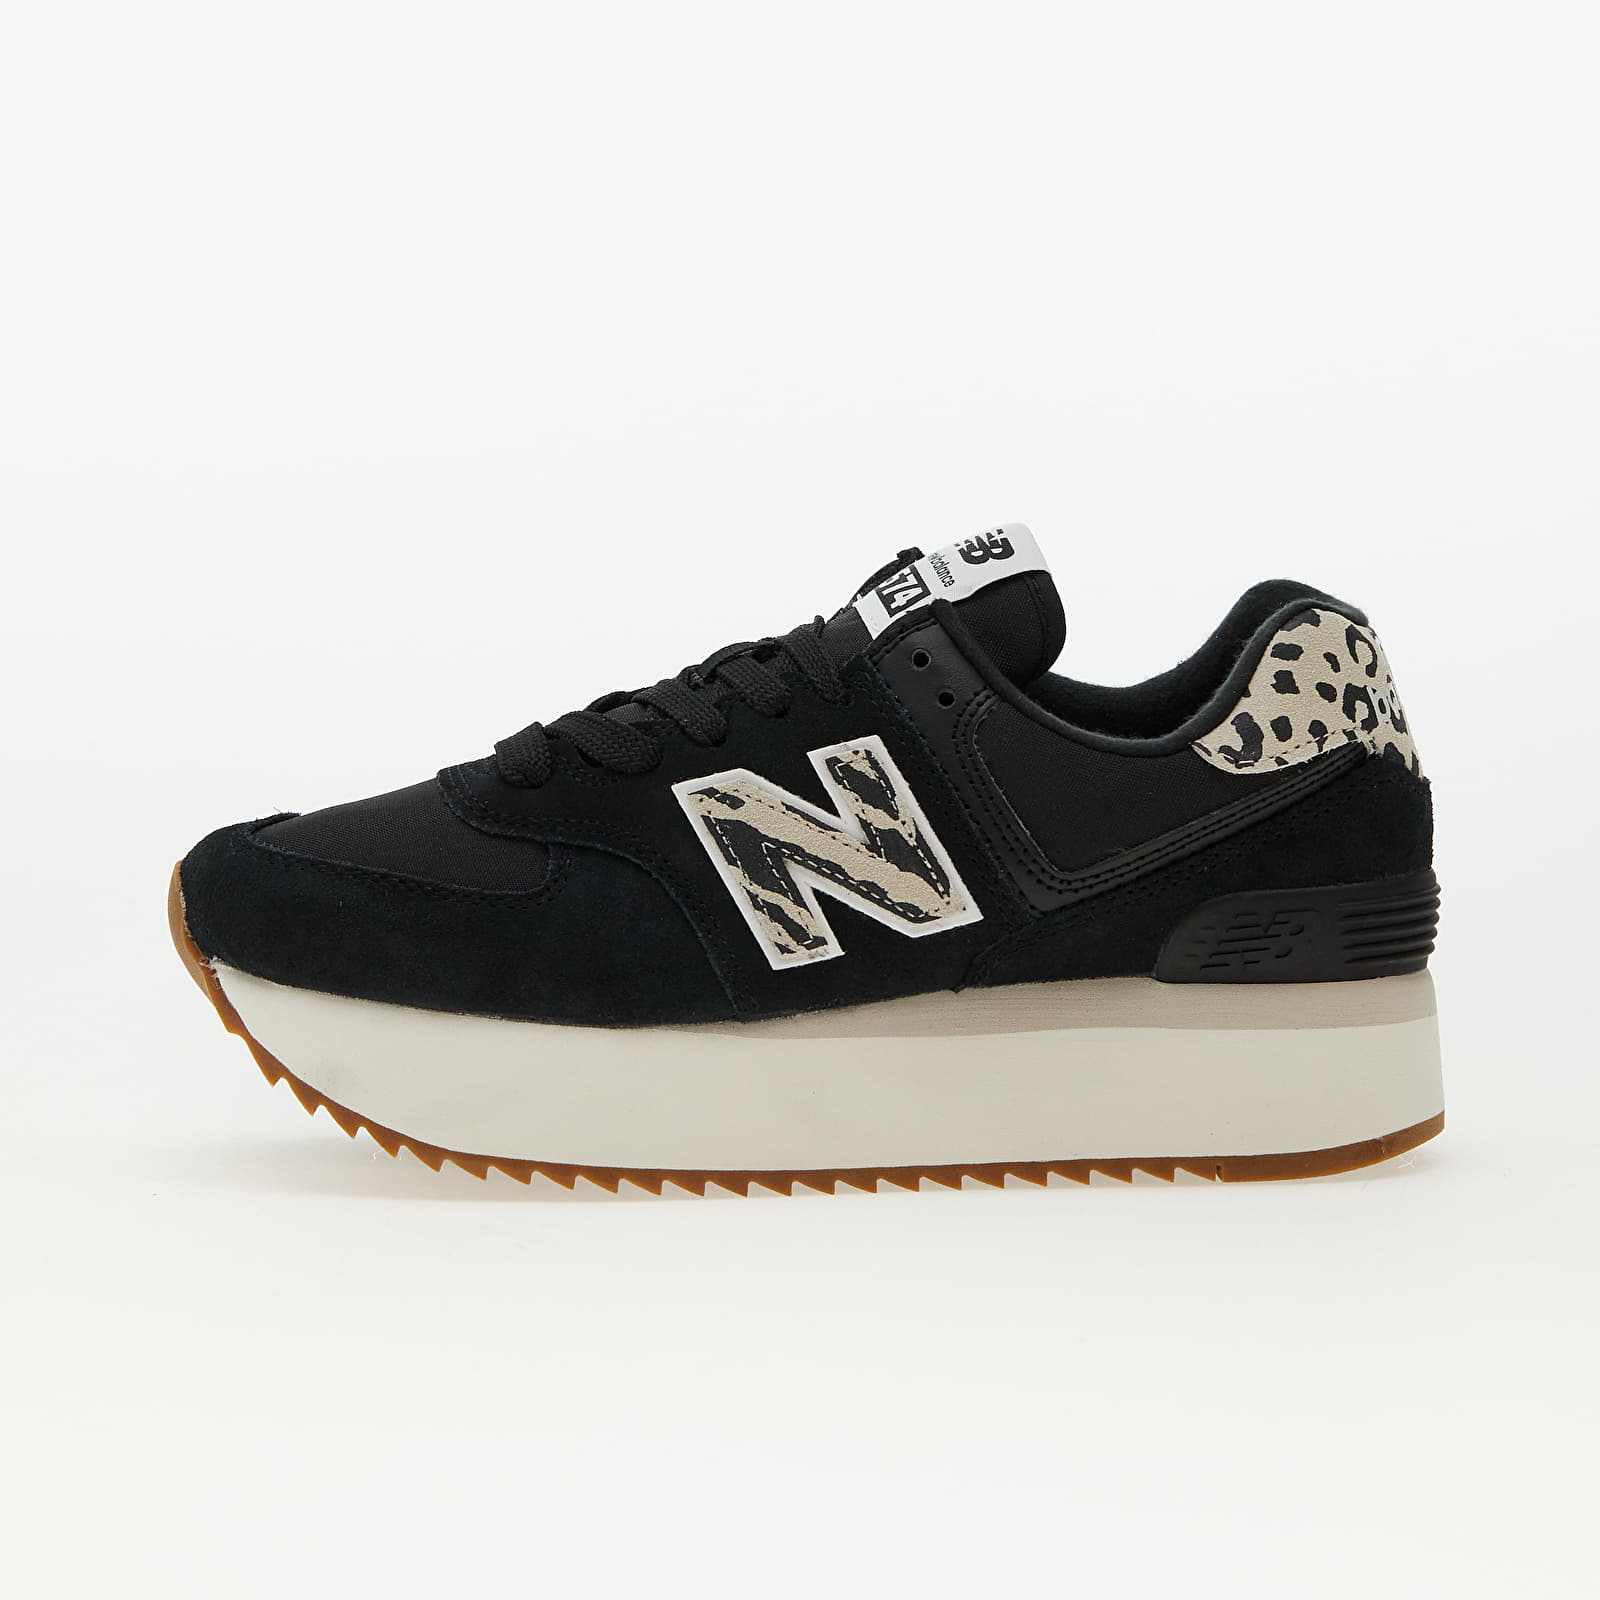 Women's sneakers and shoes New Balance 574 Black